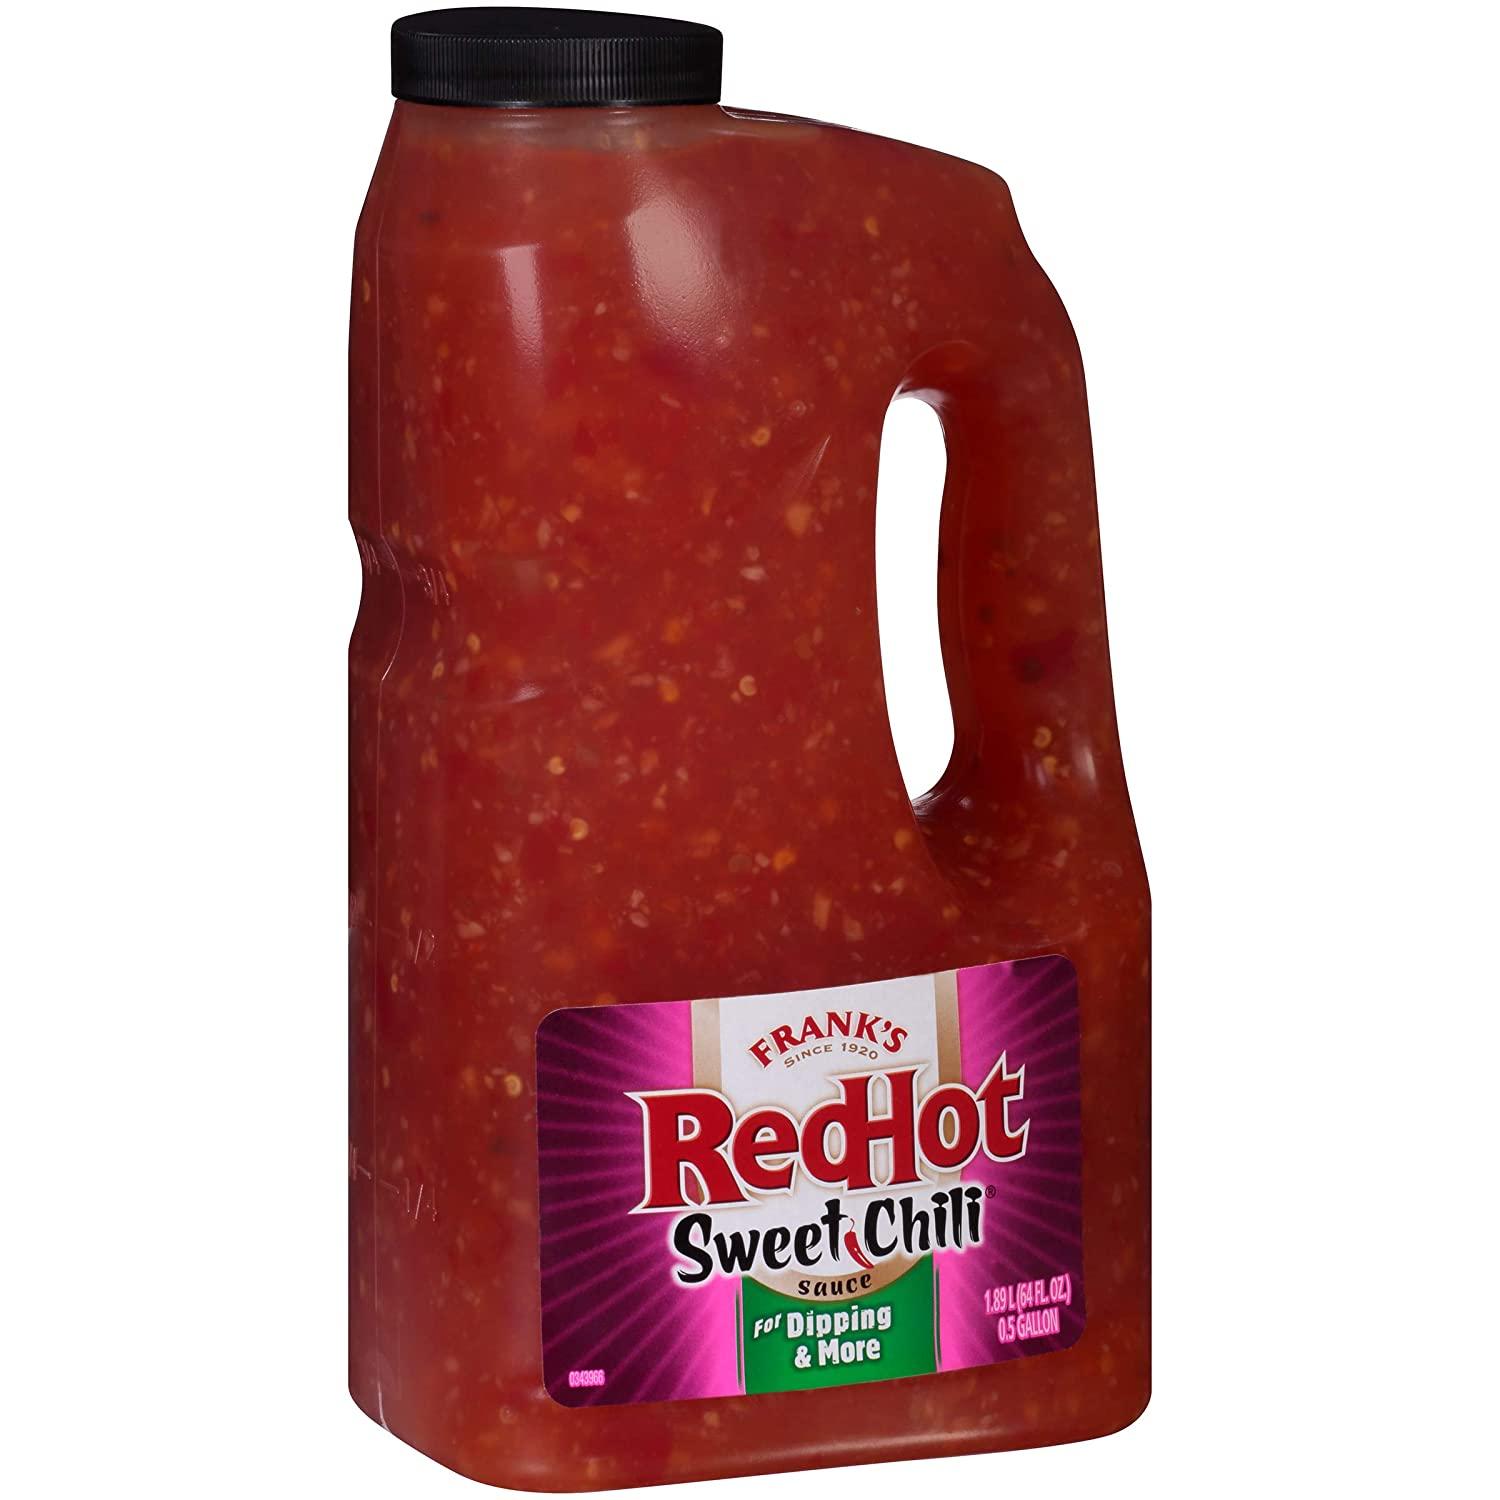 64oz Franks RedHot Sweet Chili Sauce for $7.41 Shipped